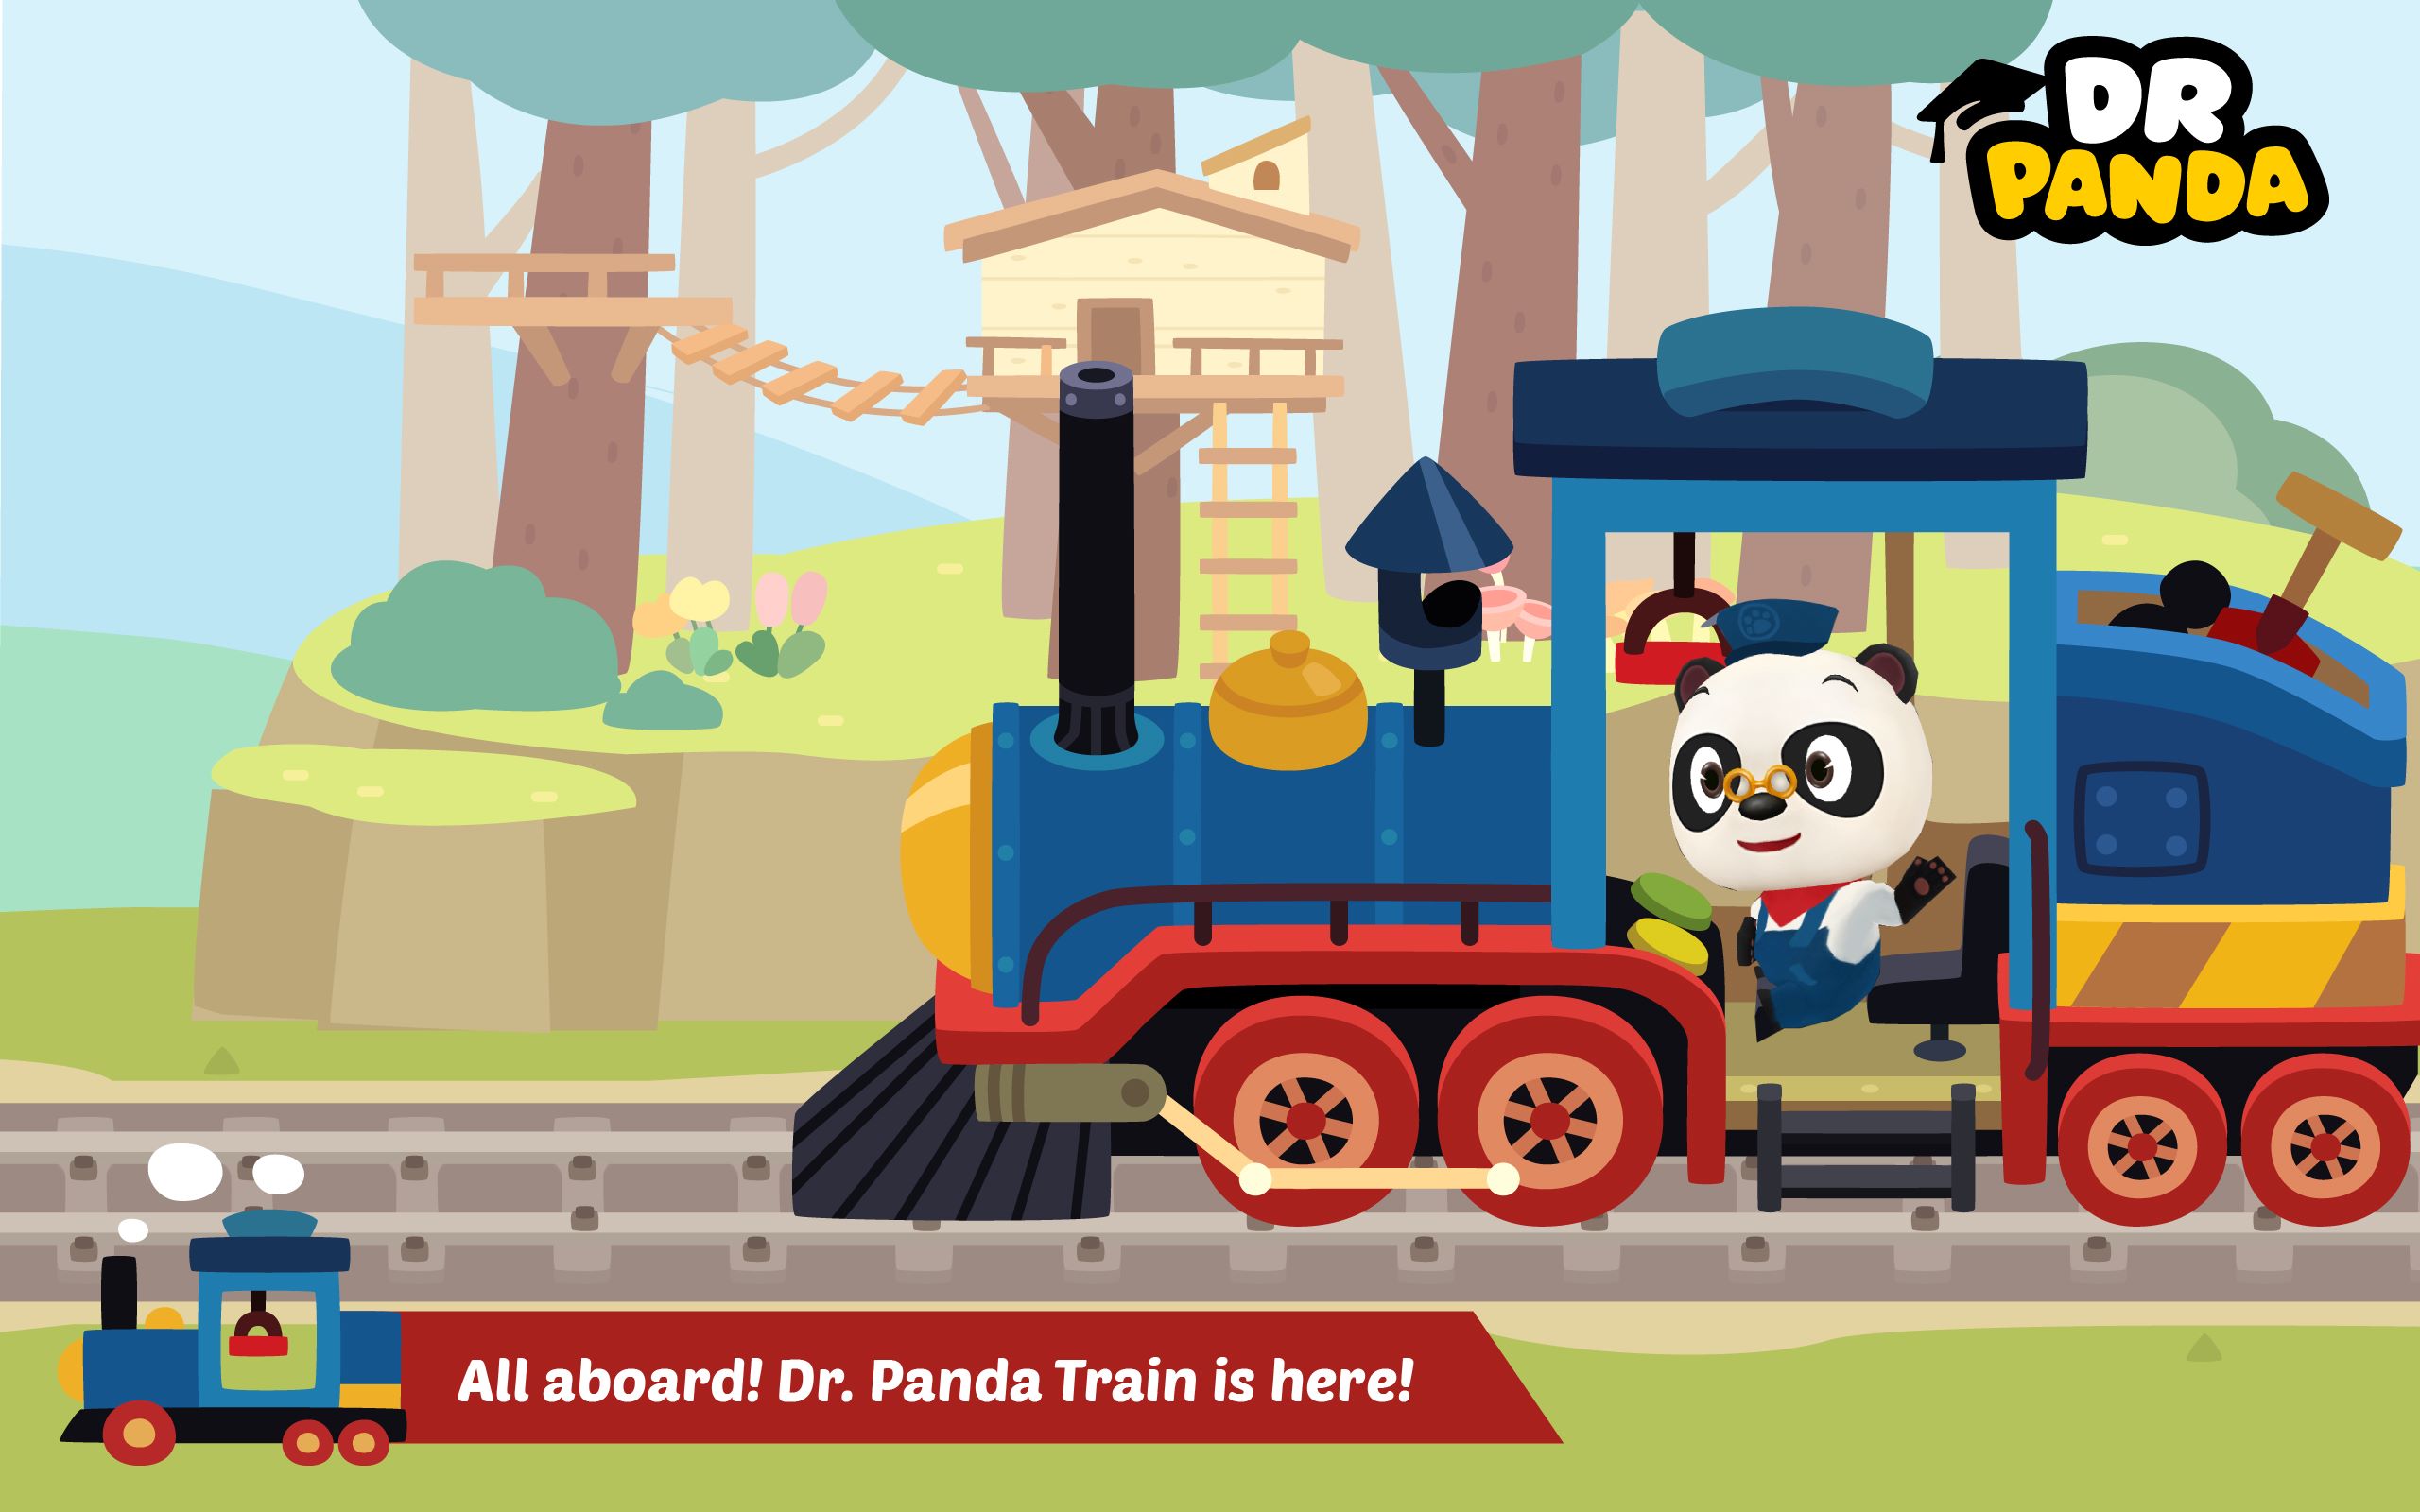 Dr. Panda Supermarket - Official app in the Microsoft Store